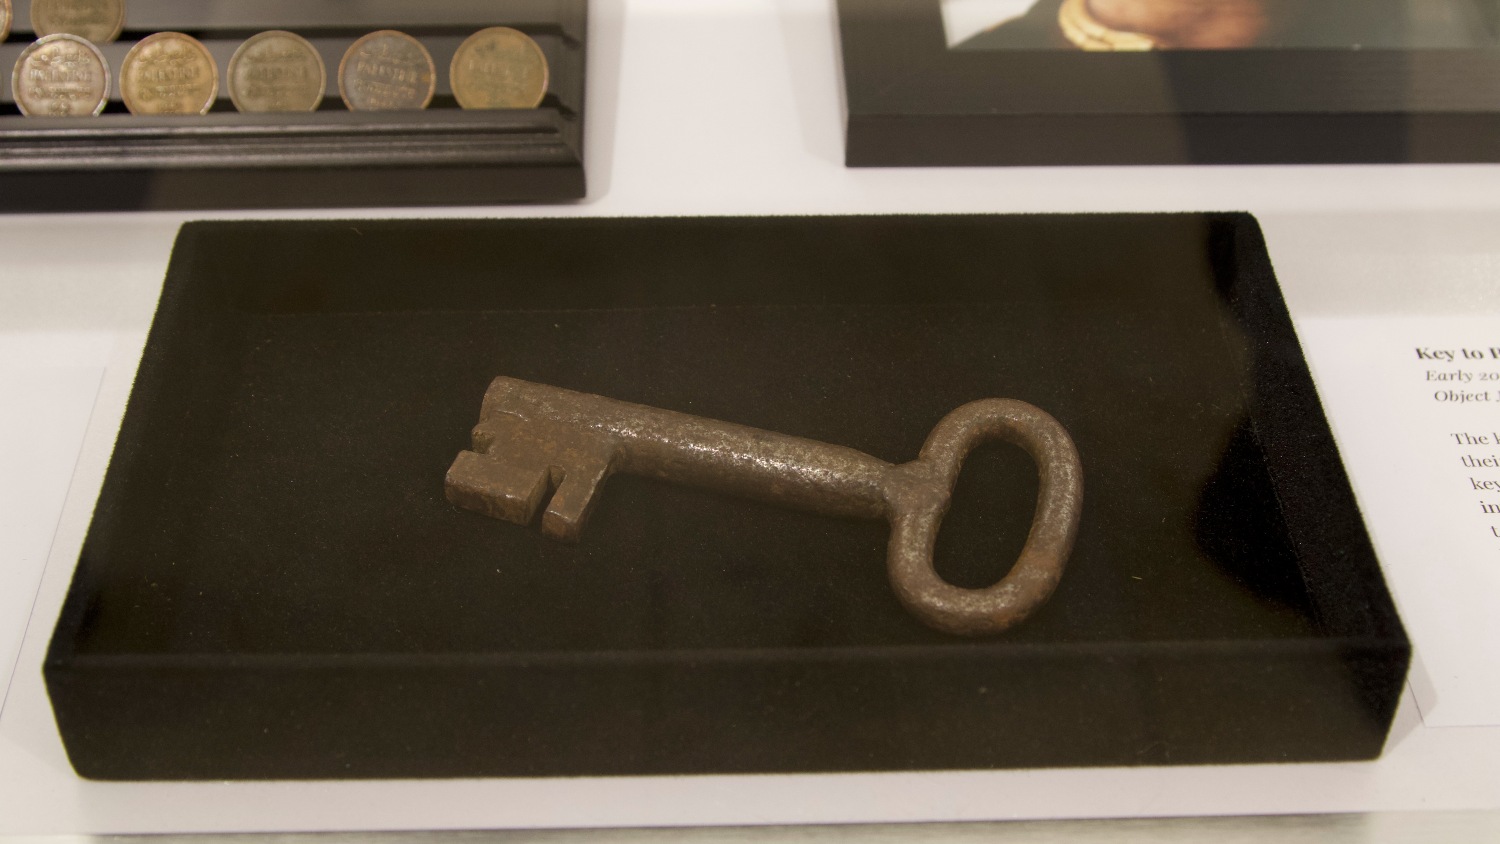 A key to the home of a Palestinian family displaced during the Nakba on display at the Museum of the Palestinian People in Washington.